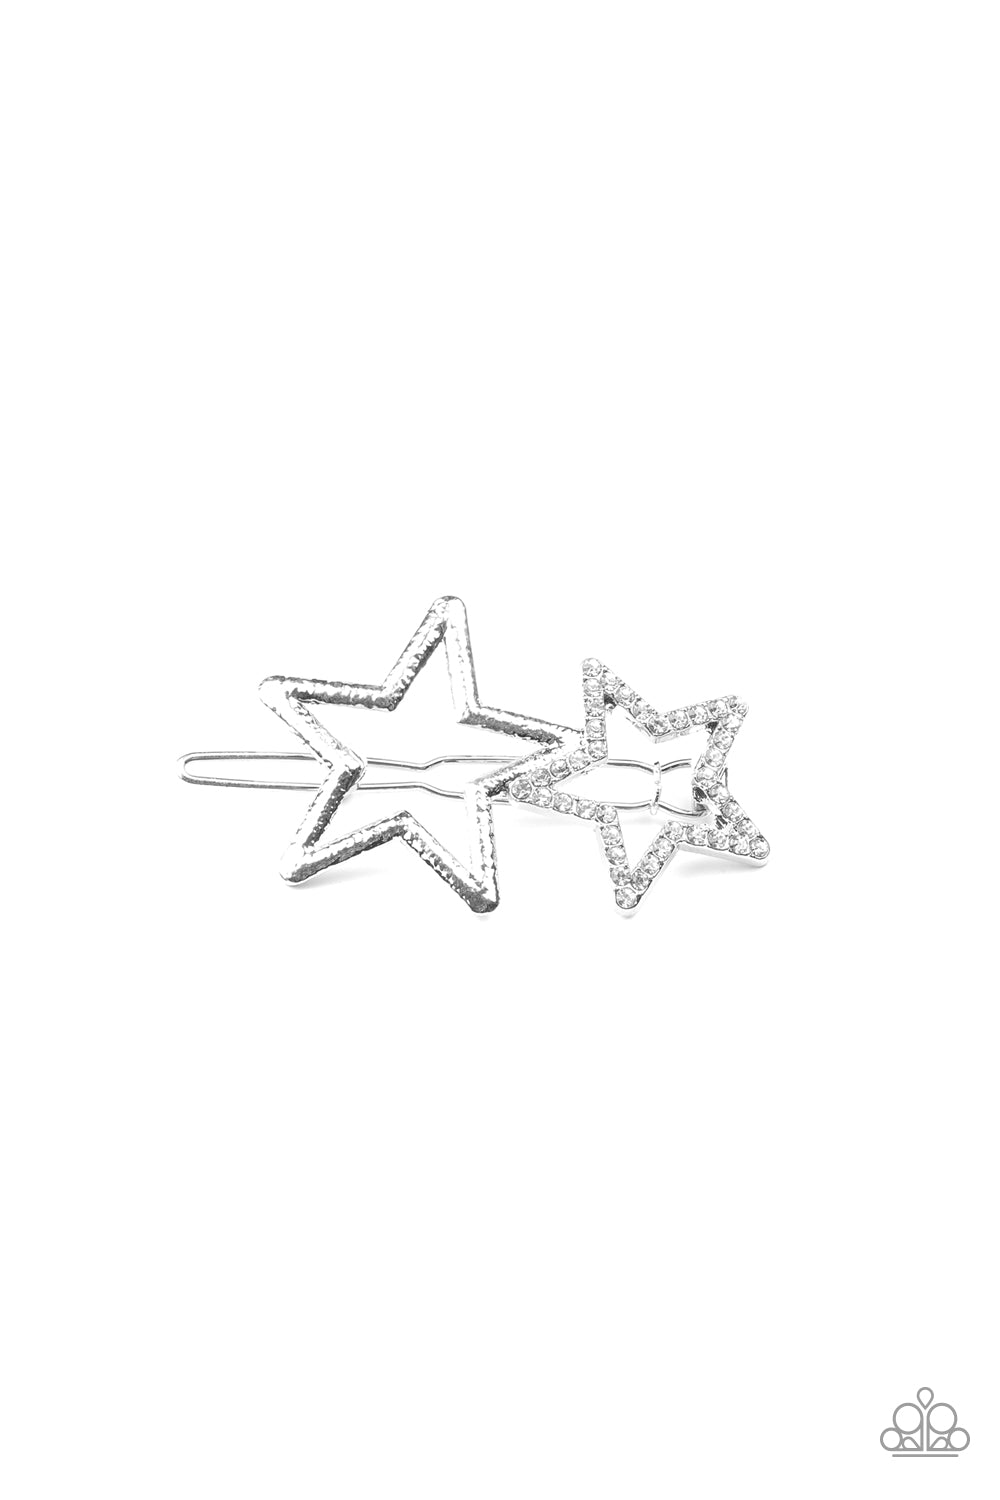 Paparazzi Accessories - Lets Get This Party STAR-ted! - White Hair Clip